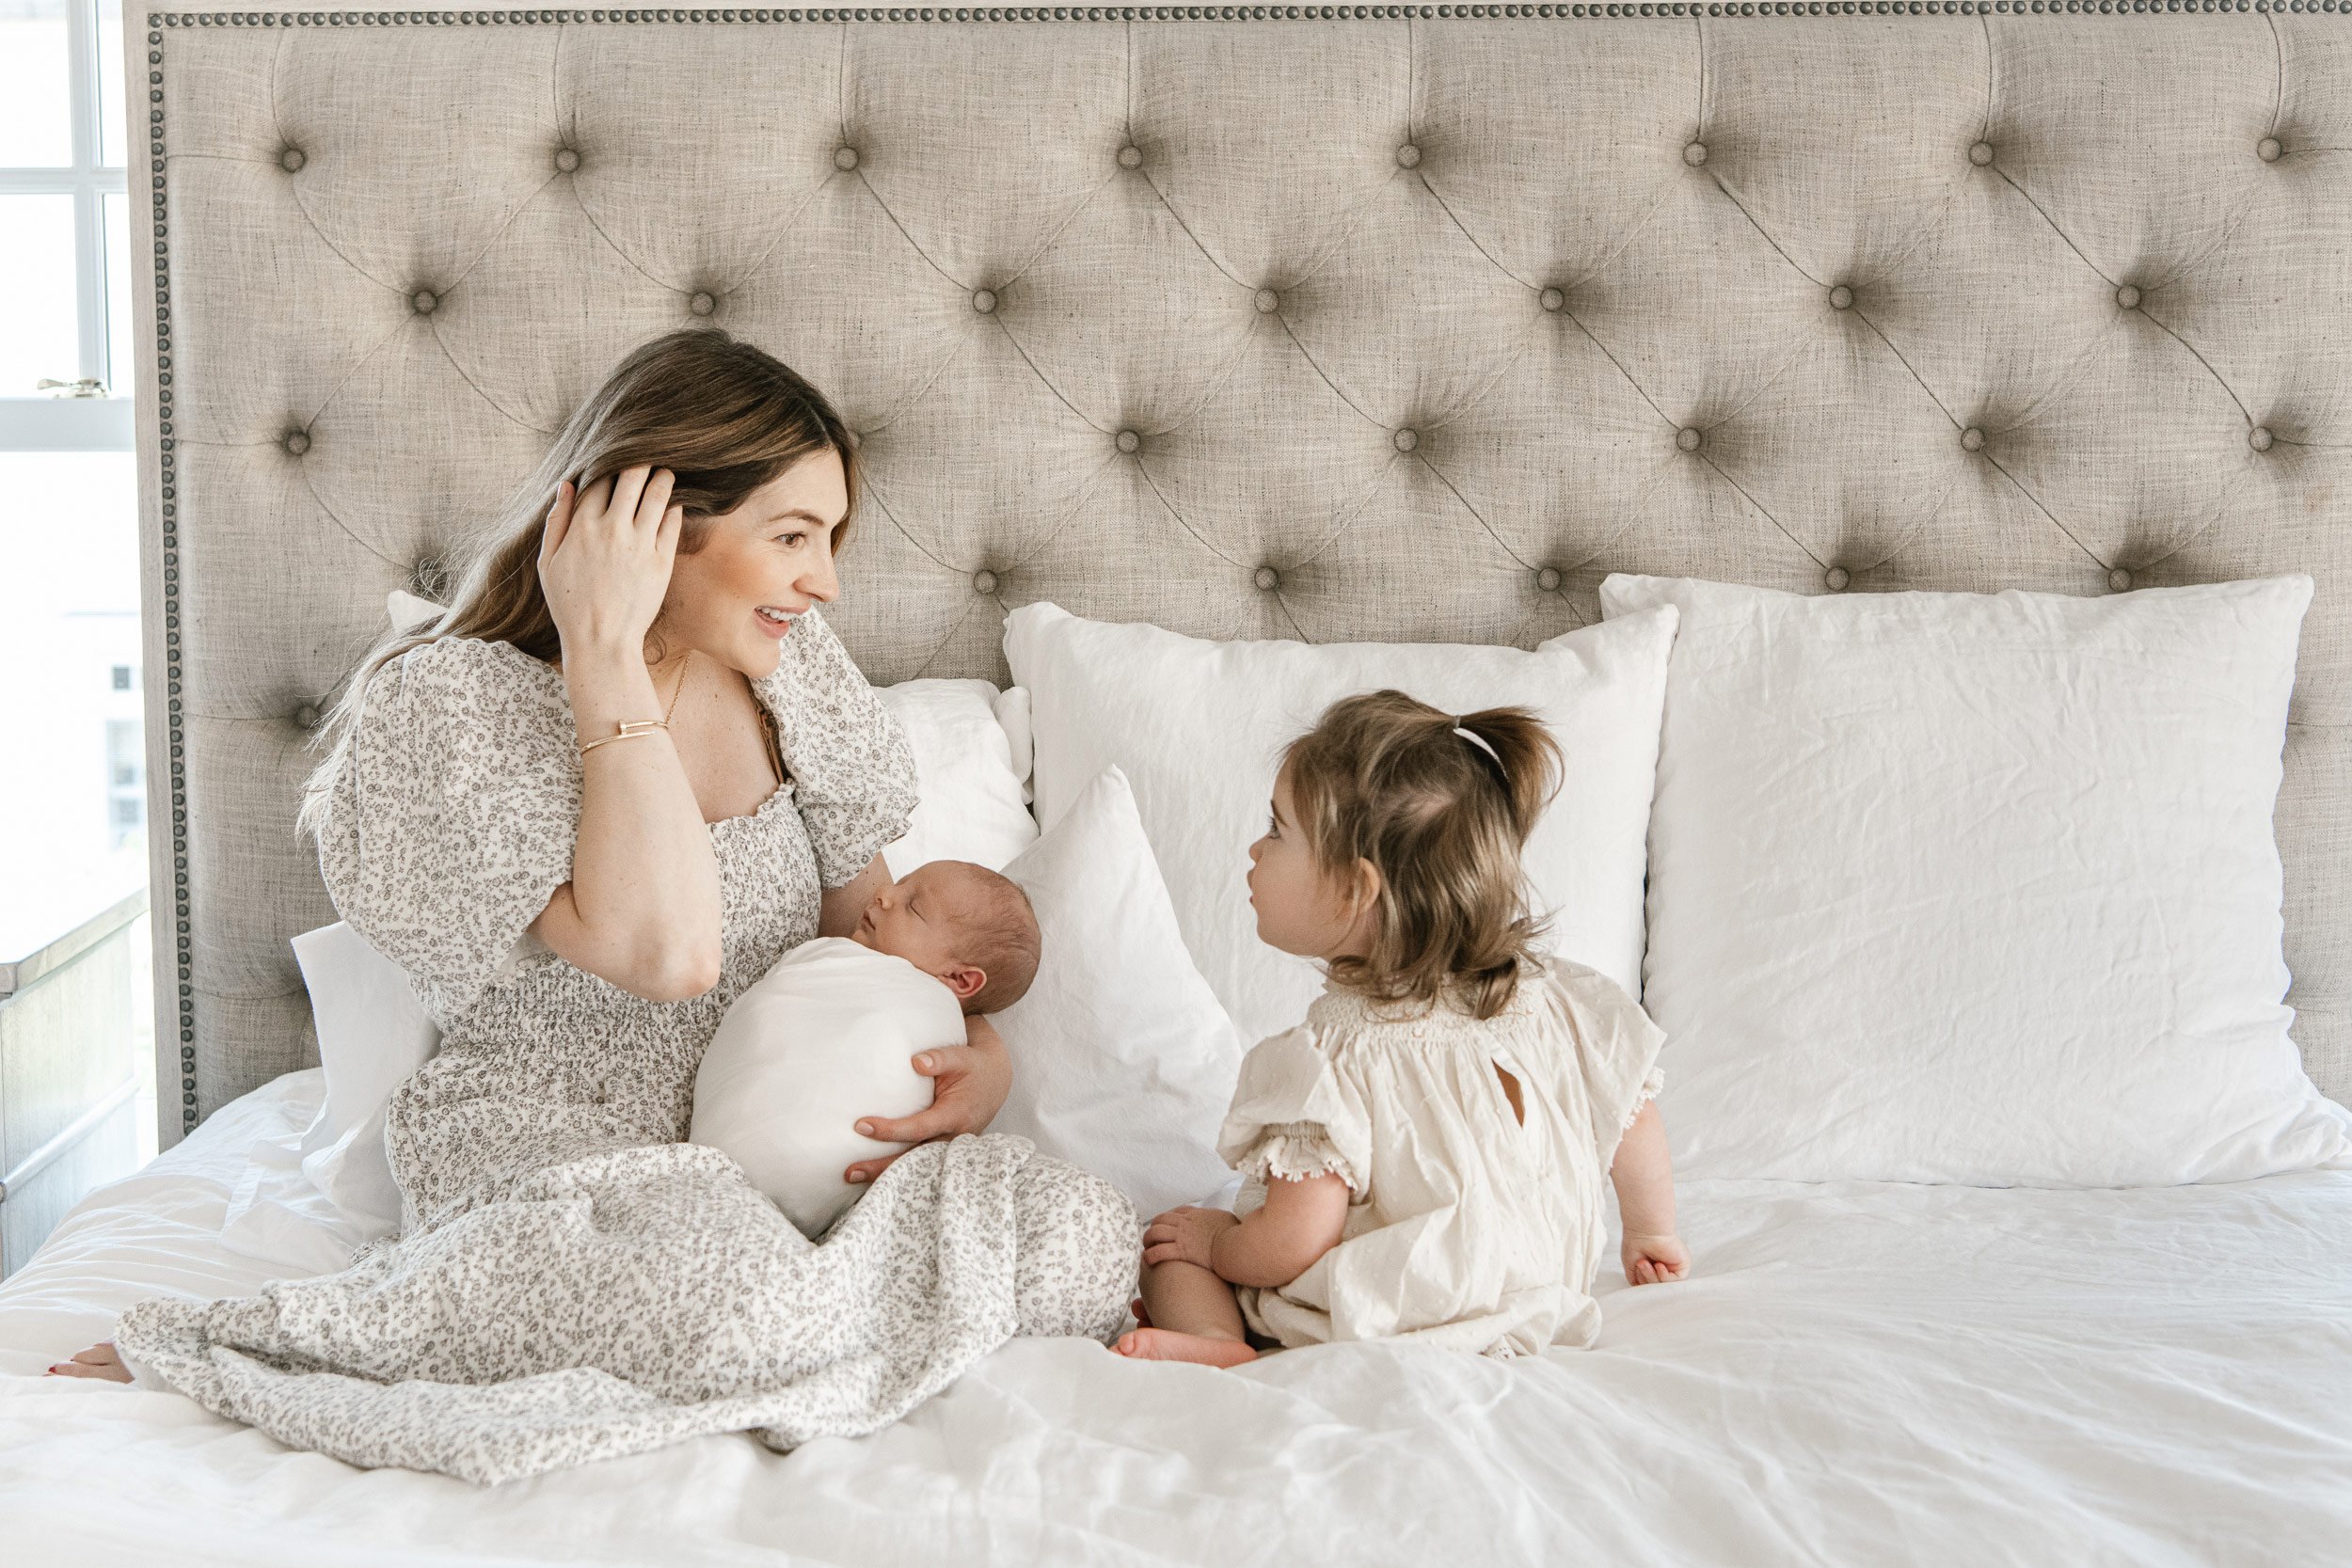  A mother sits on her bed with her newborn and toddler little girl by Nicole Hawkins Photography. NJ photographer #NicoleHawkinsPhotography #InHomeNewborn #JerseyShoreNewborns #MontclairPhotographers #NewbornPhotography #baby #newborn 